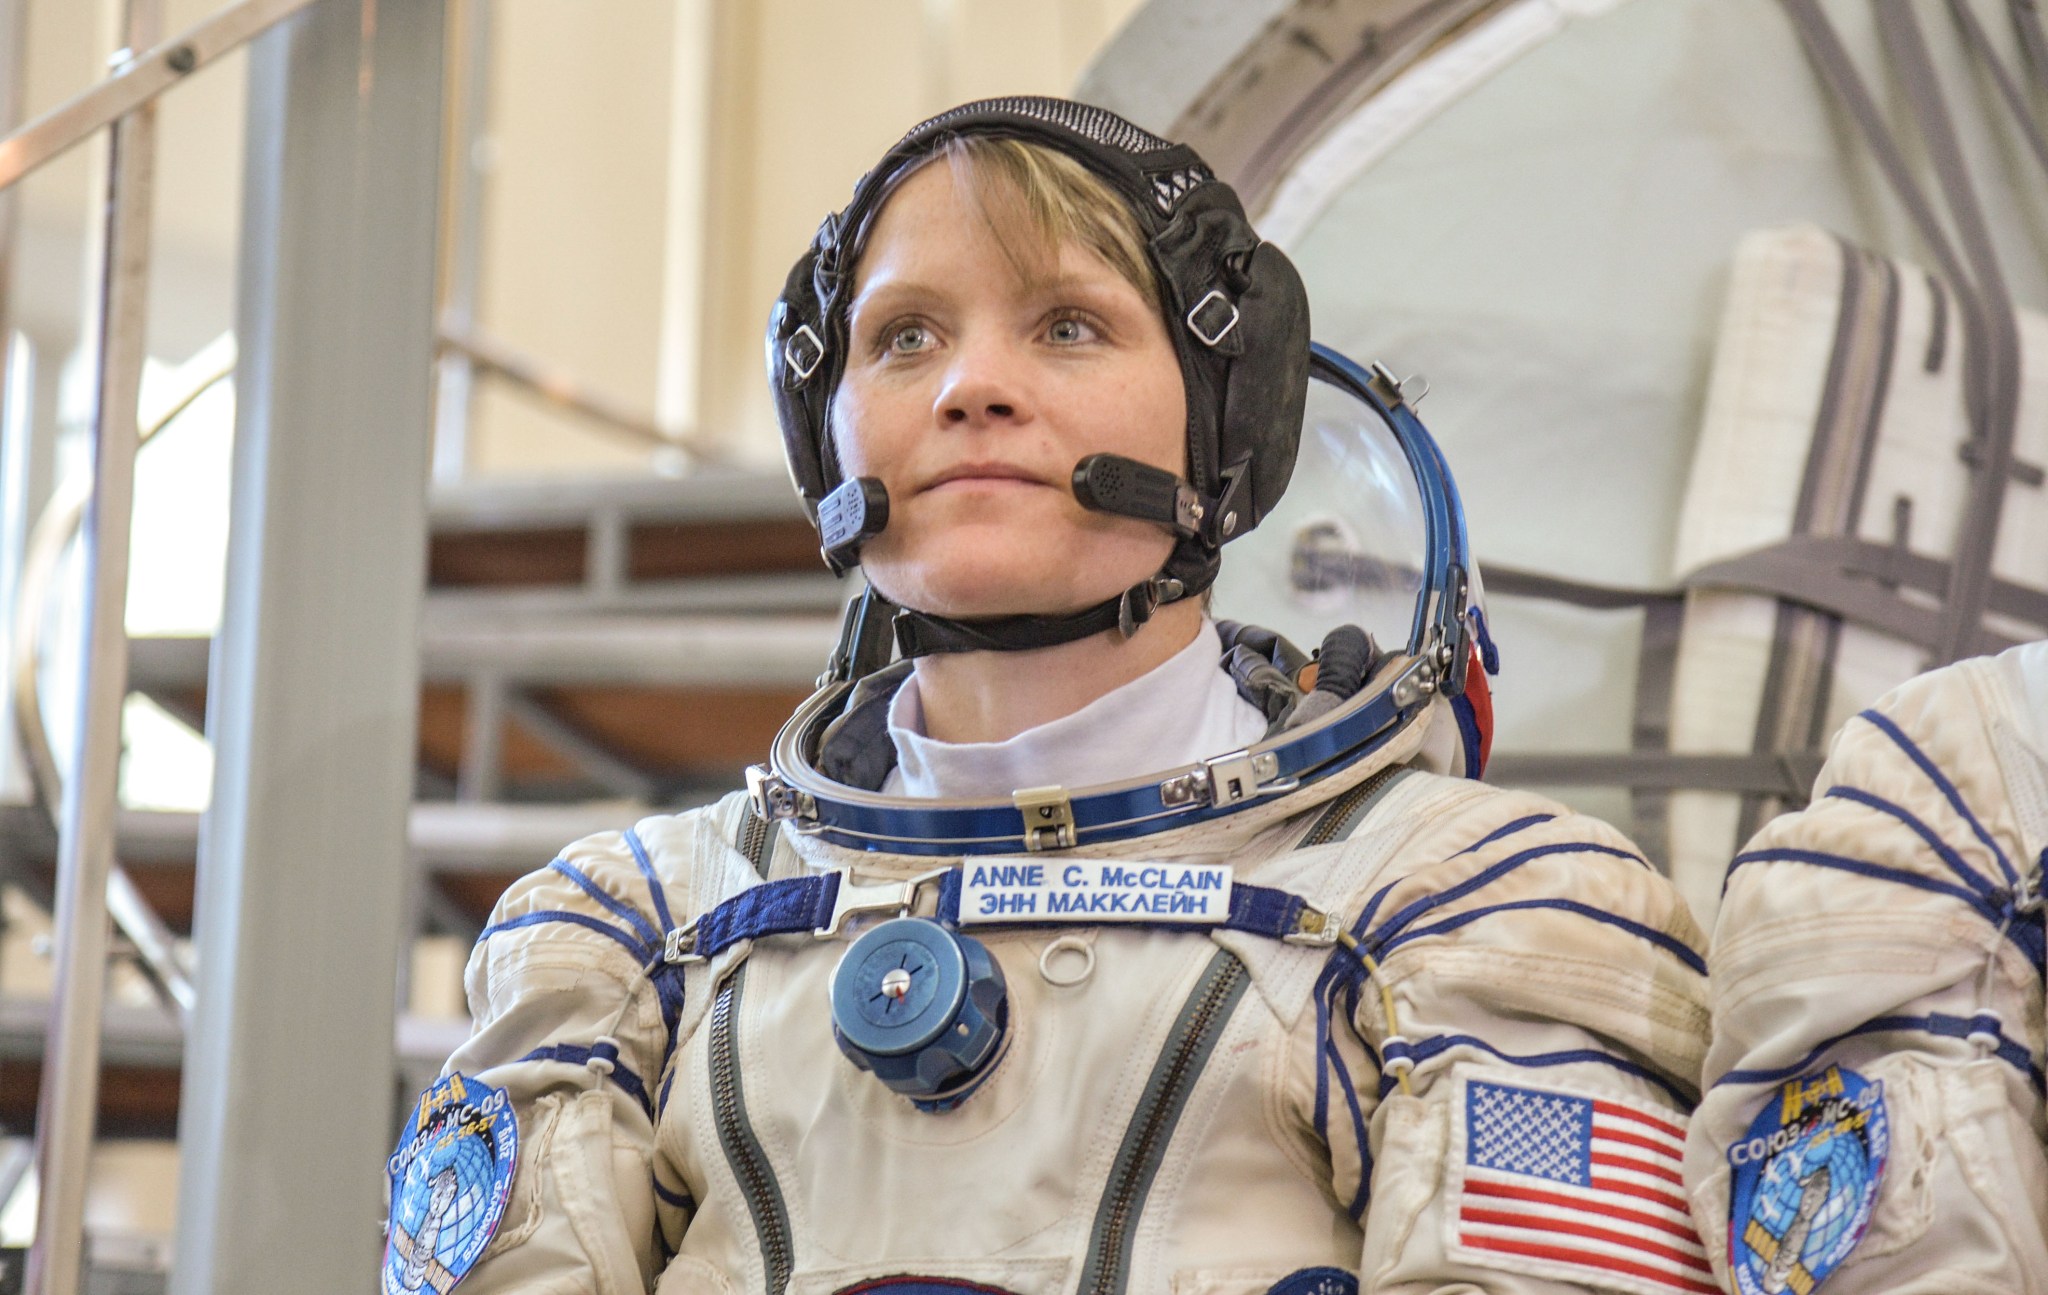 NASA astronaut Anne McClain listens to a reporter’s question at the Gagarin Cosmonaut Training Center in Star City, Russia.